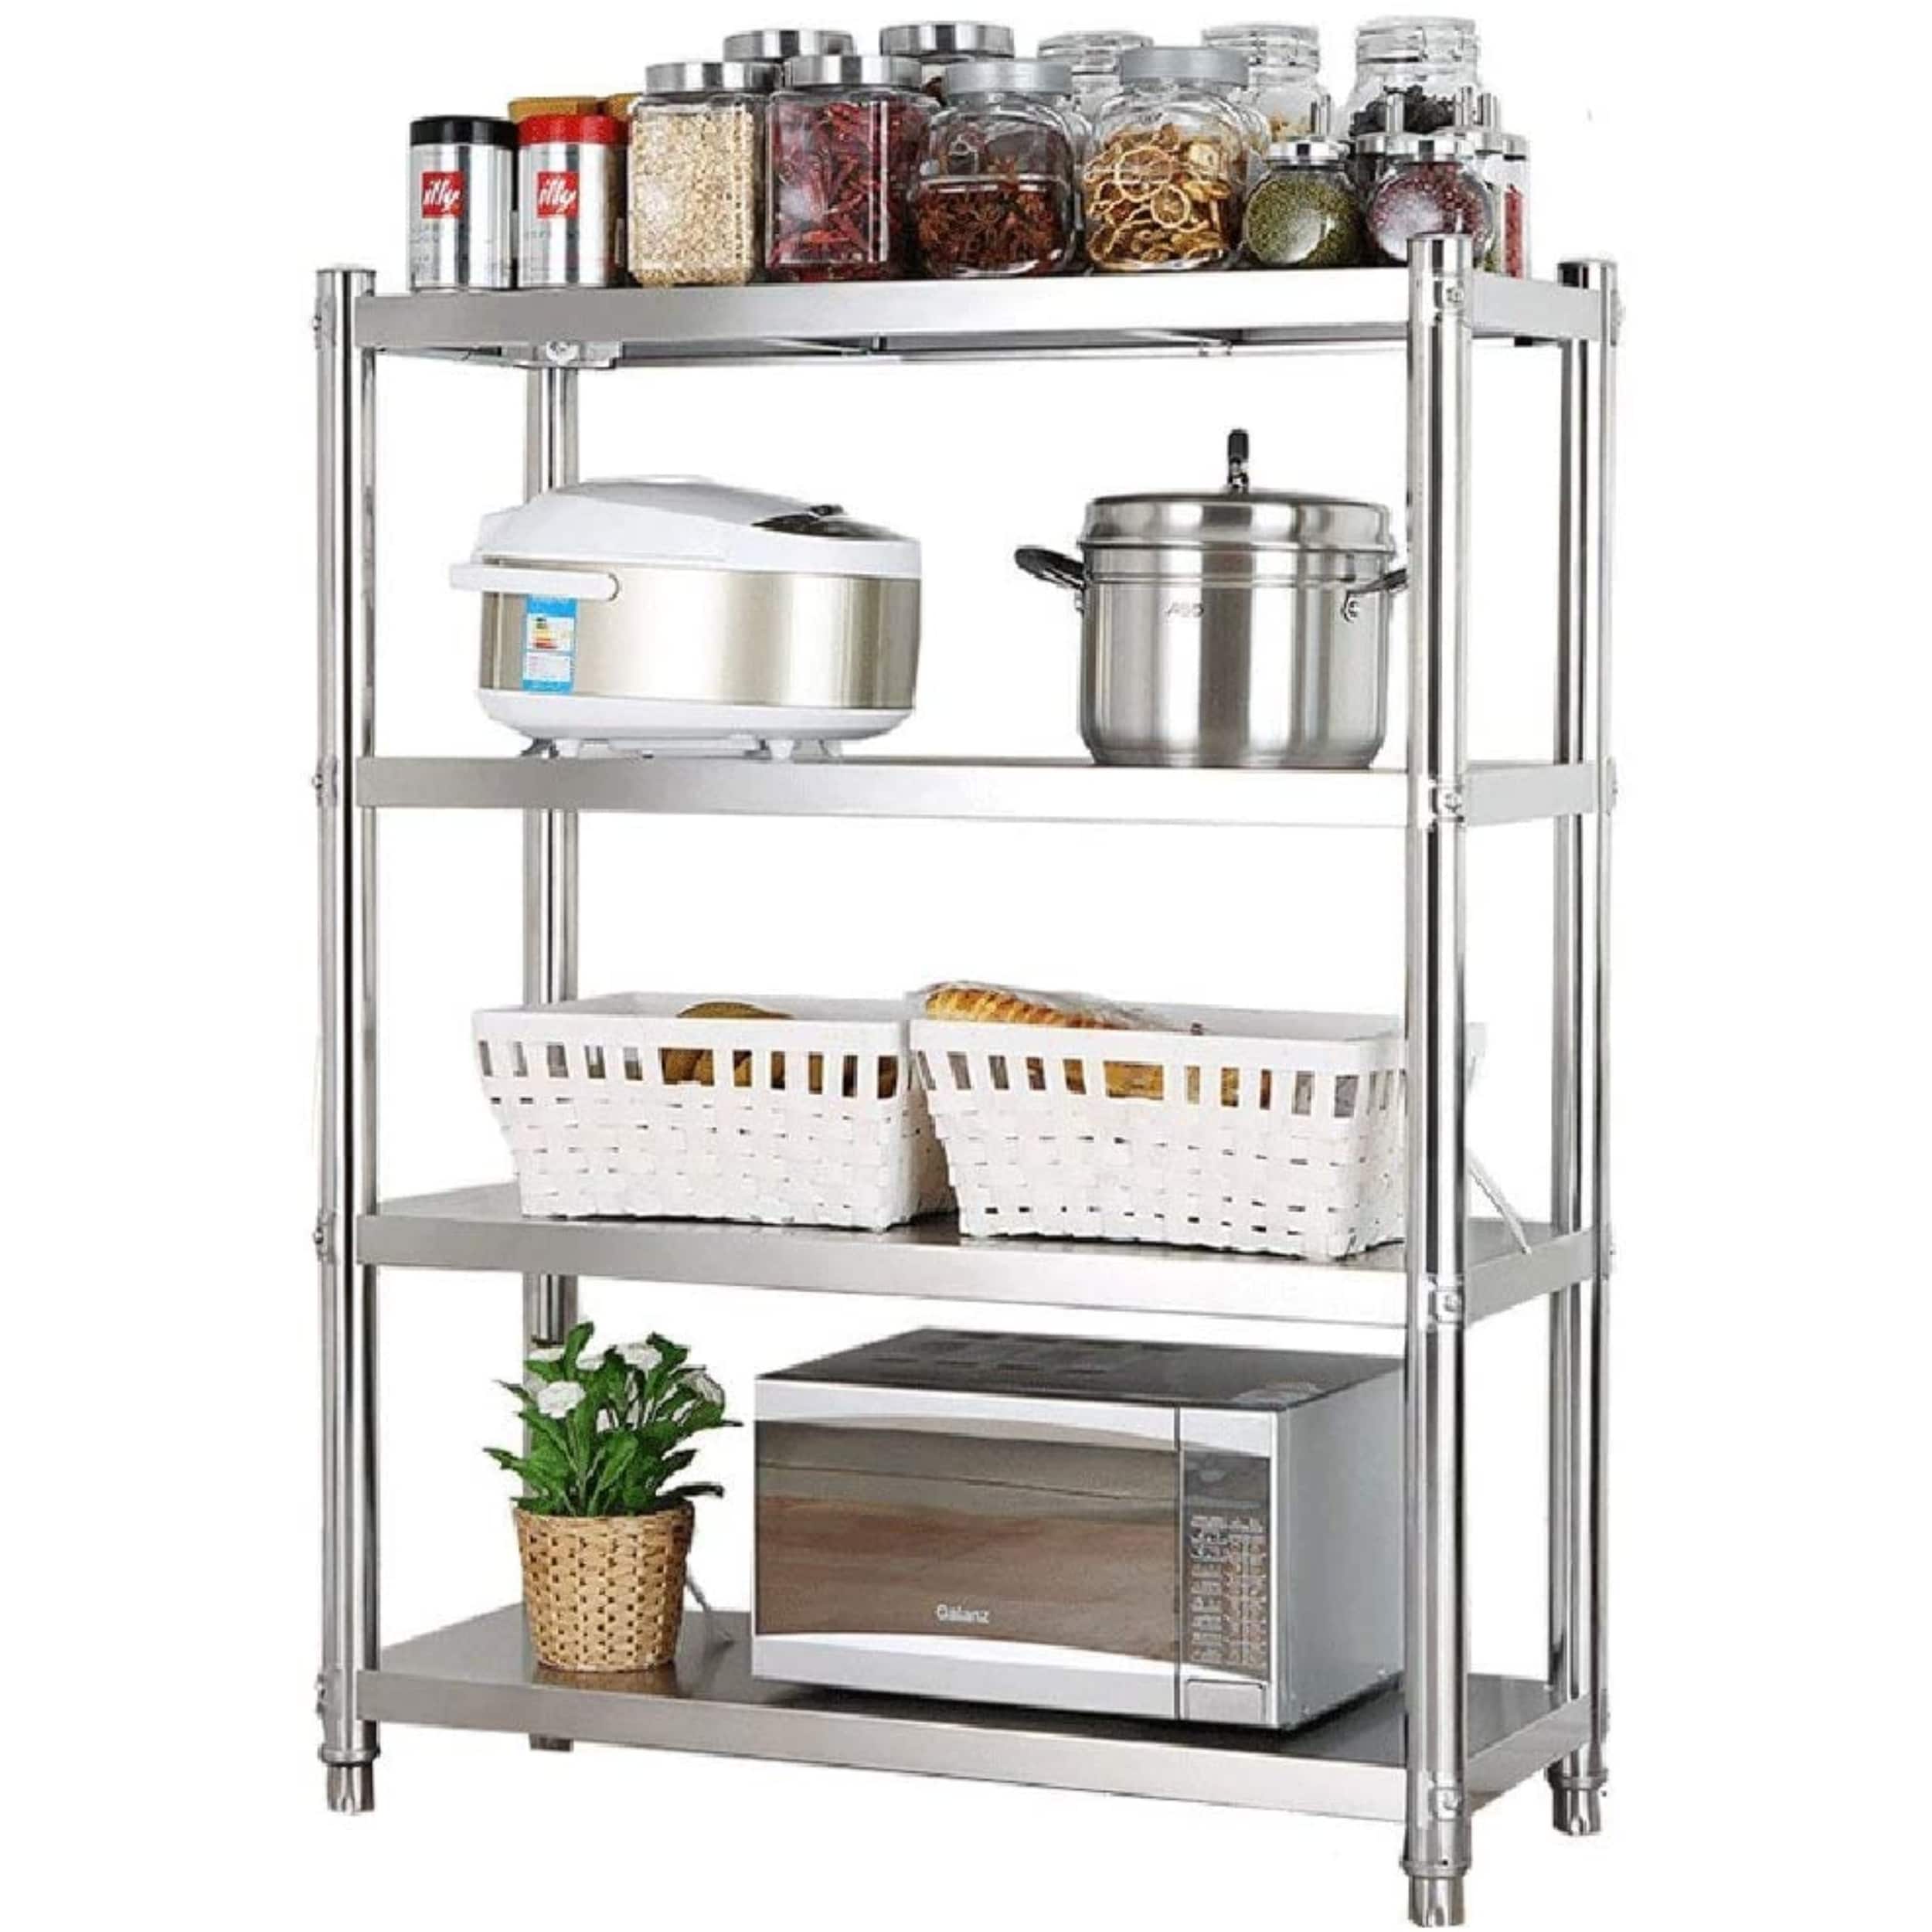 https://ak1.ostkcdn.com/images/products/is/images/direct/4a37df4c33bb09f991ec2cae0cb9f6f9f60334f3/Large-Microwave-Toaster-Rack-Kitchen-Storage-Rack-Stainless-Steel-Storage-Rack-92CM.jpg